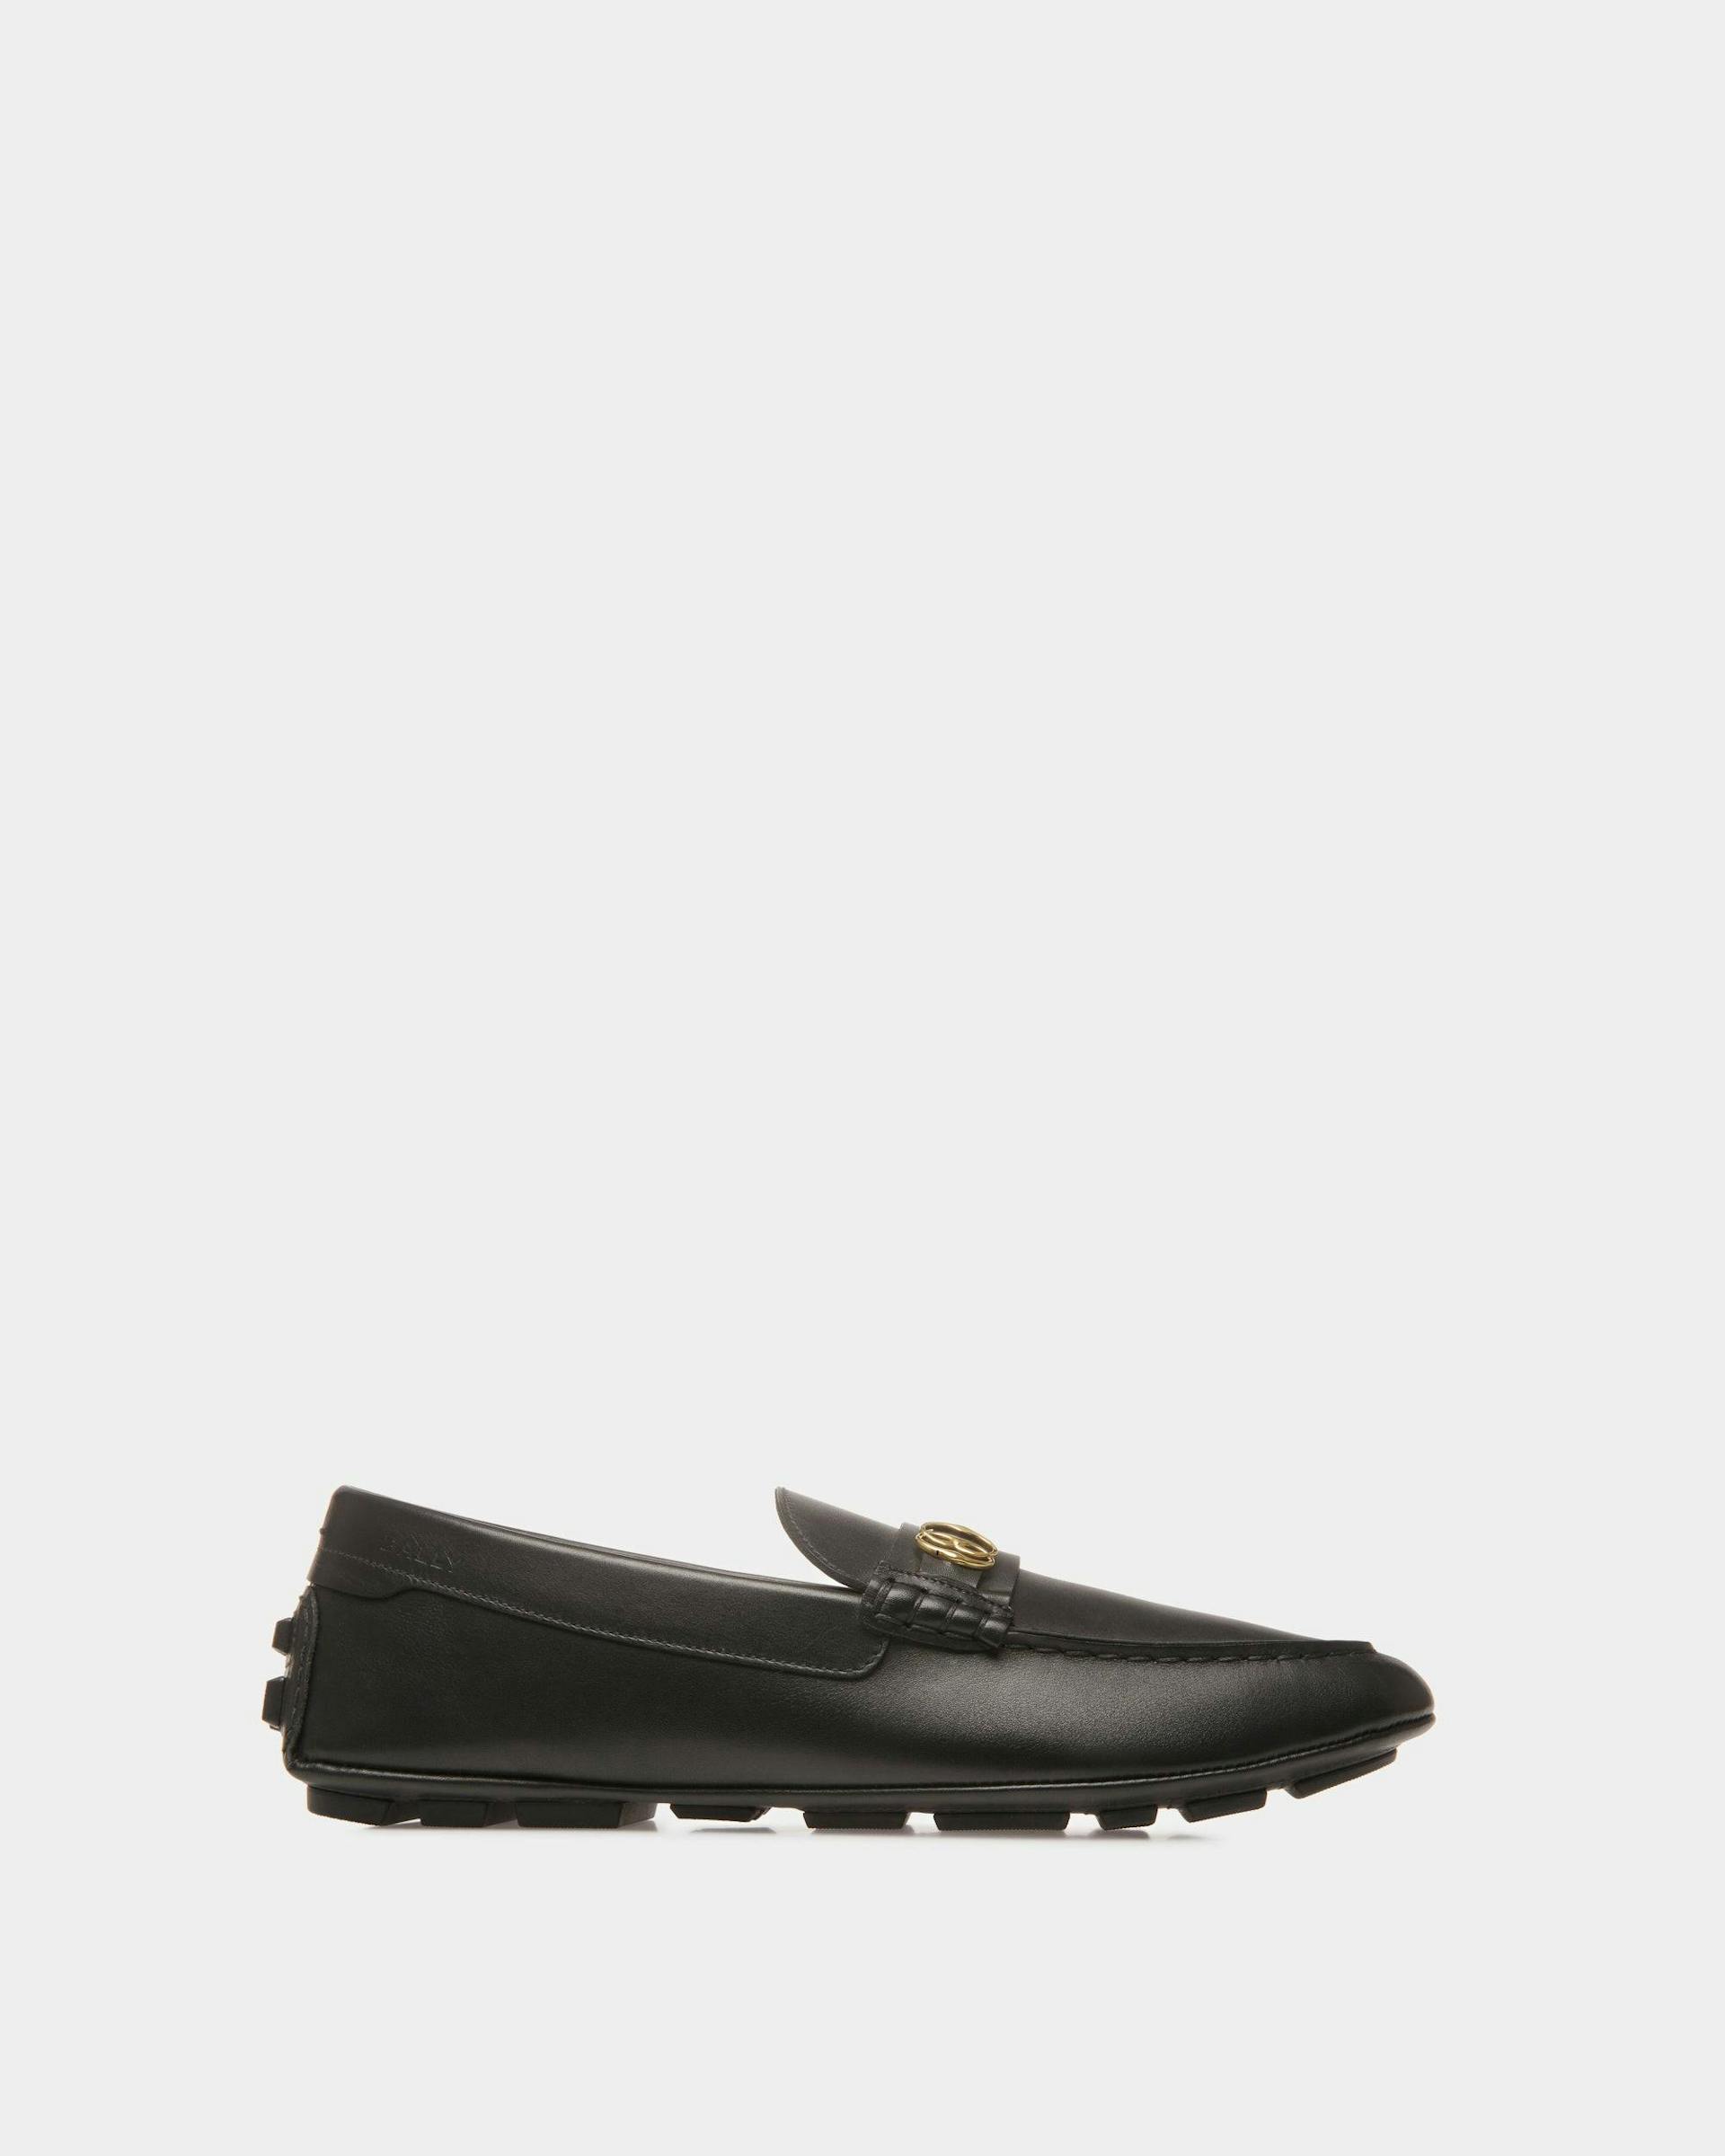 Men's Kerbs Drivers In Black Leather | Bally | Still Life Side